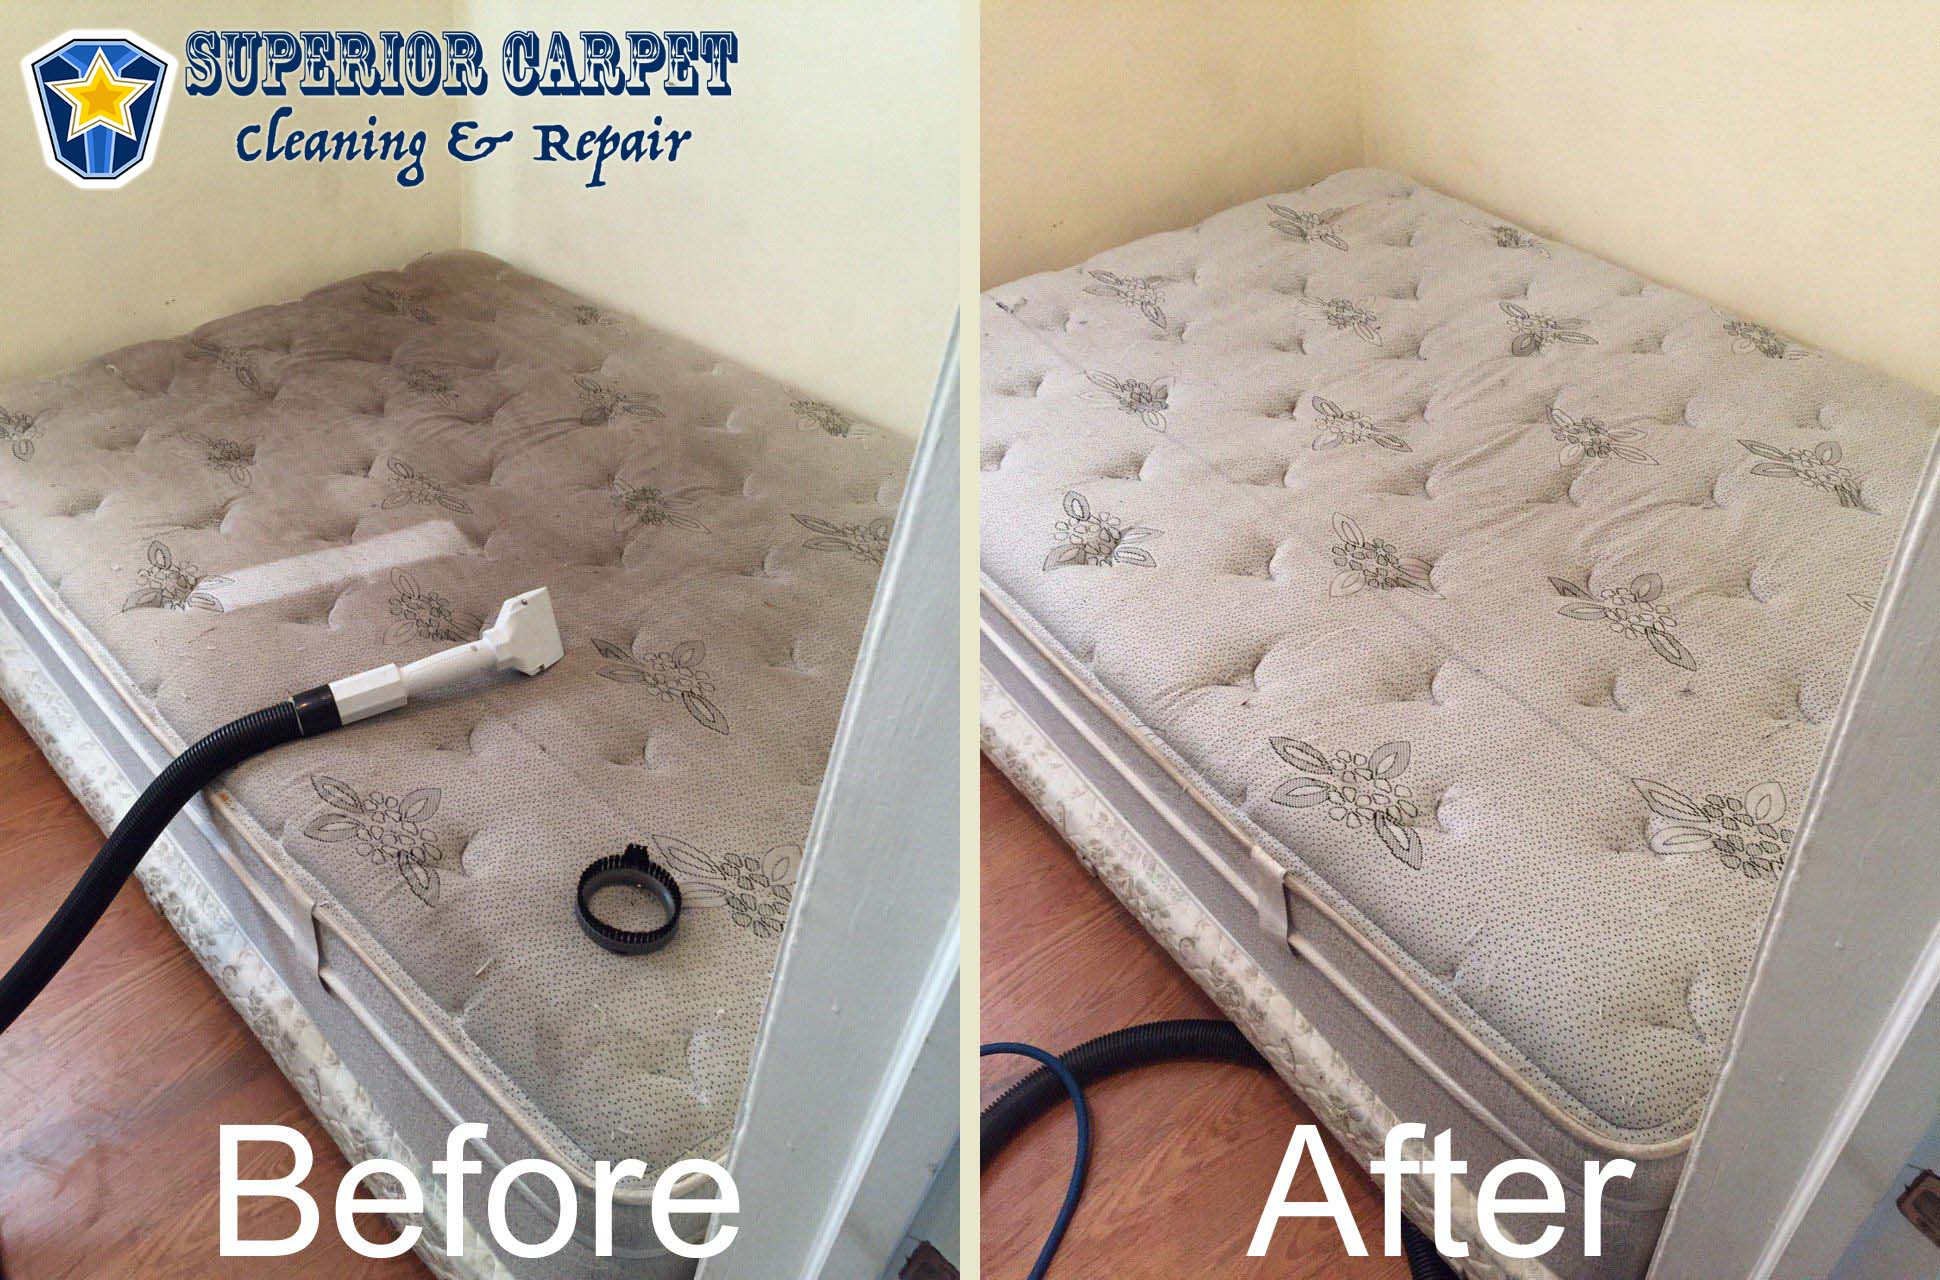 Can You Clean a Mattress With a Carpet Cleaner?